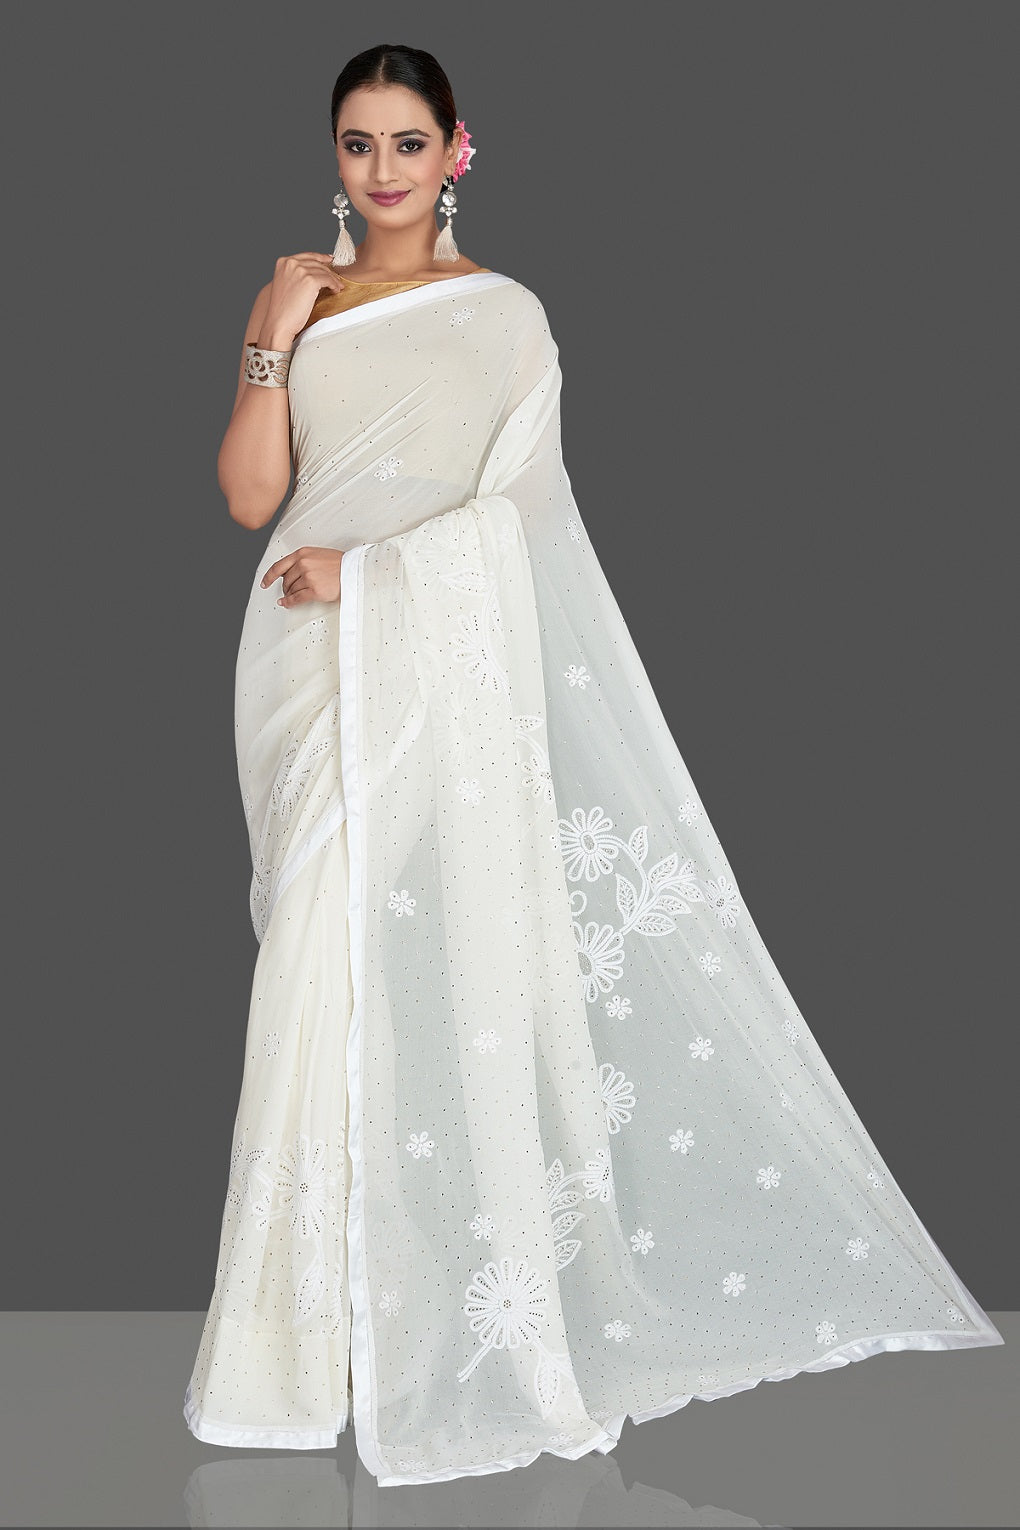 Shop elegant white Lucknowi chikankari work georgette saree online in USA. Flaunt your sartorial choice with beautiful embroidered saris, handwoven sarees, georgette sarees, pure silk sarees from Pure Elegance Indian saree store in USA.-full view